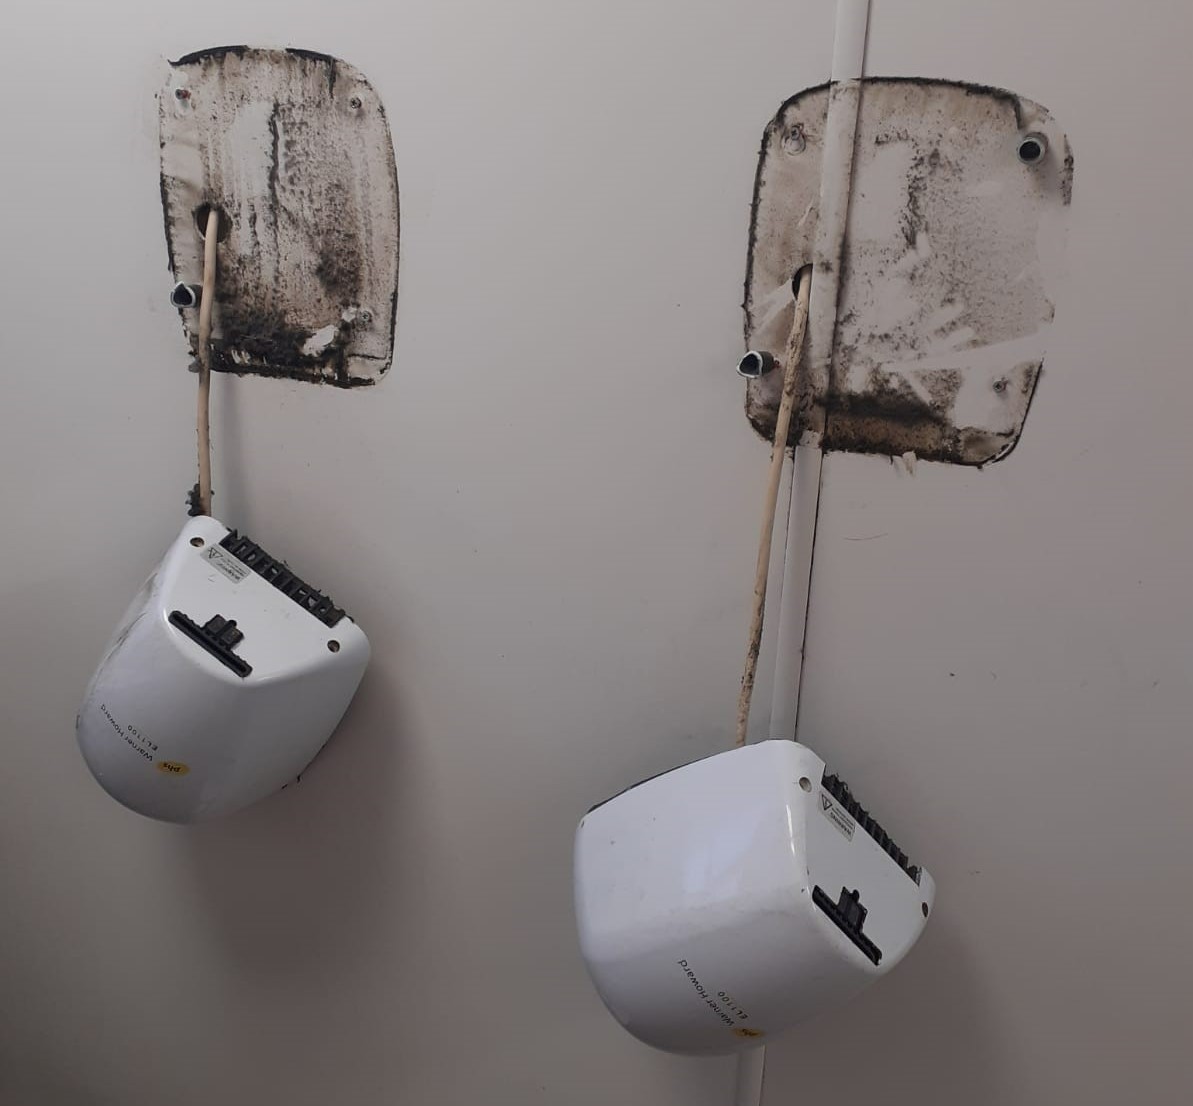 Image of vandalism to a toilet